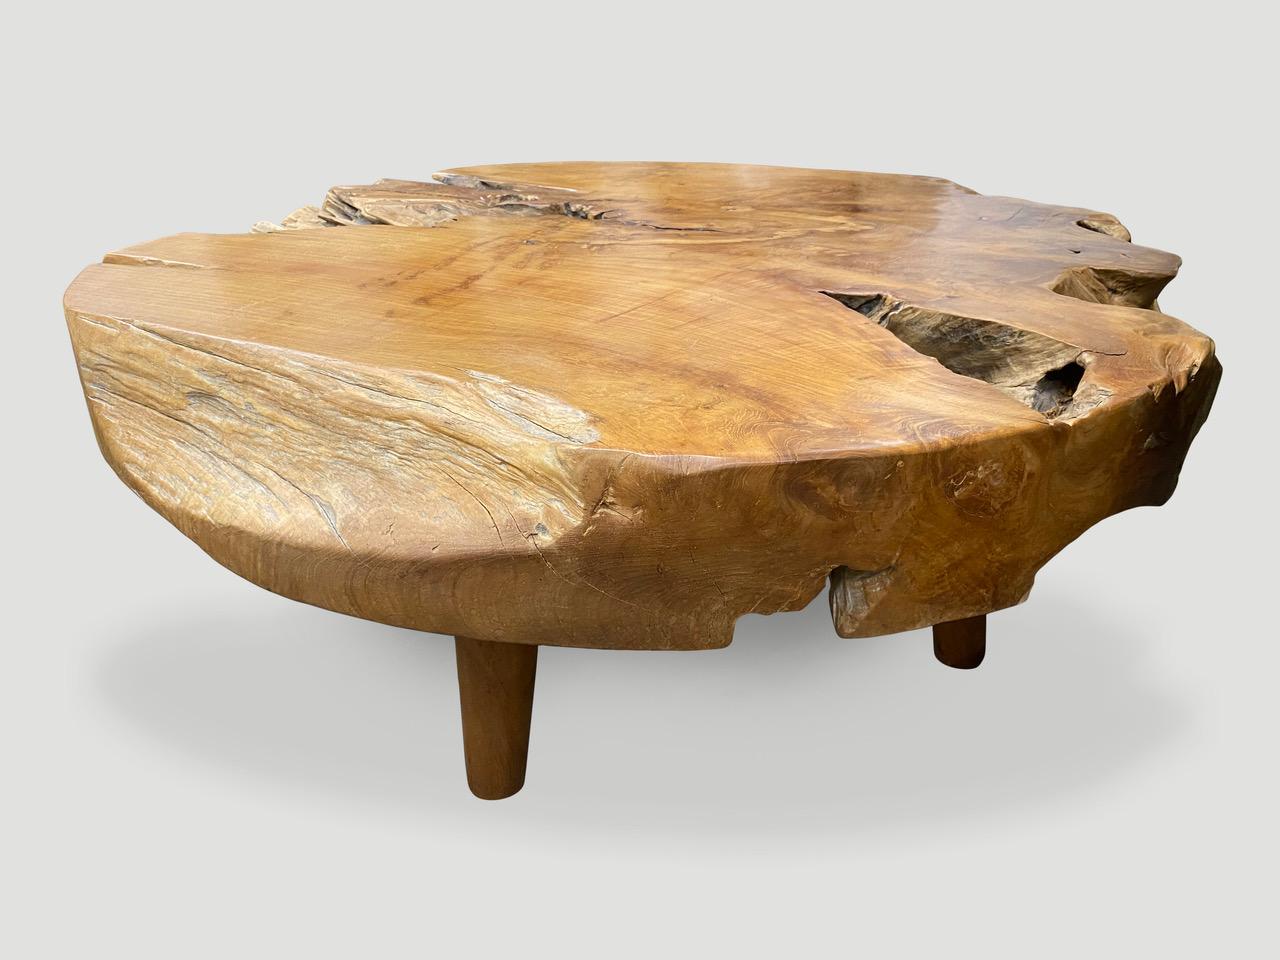 Impressive five inch thick teak wood coffee table hand carved from a single log. Floating on mid-century style cone legs. Organic with a twist. Finished with a natural oil revealing the beautiful wood grain.

Own an Andrianna Shamaris